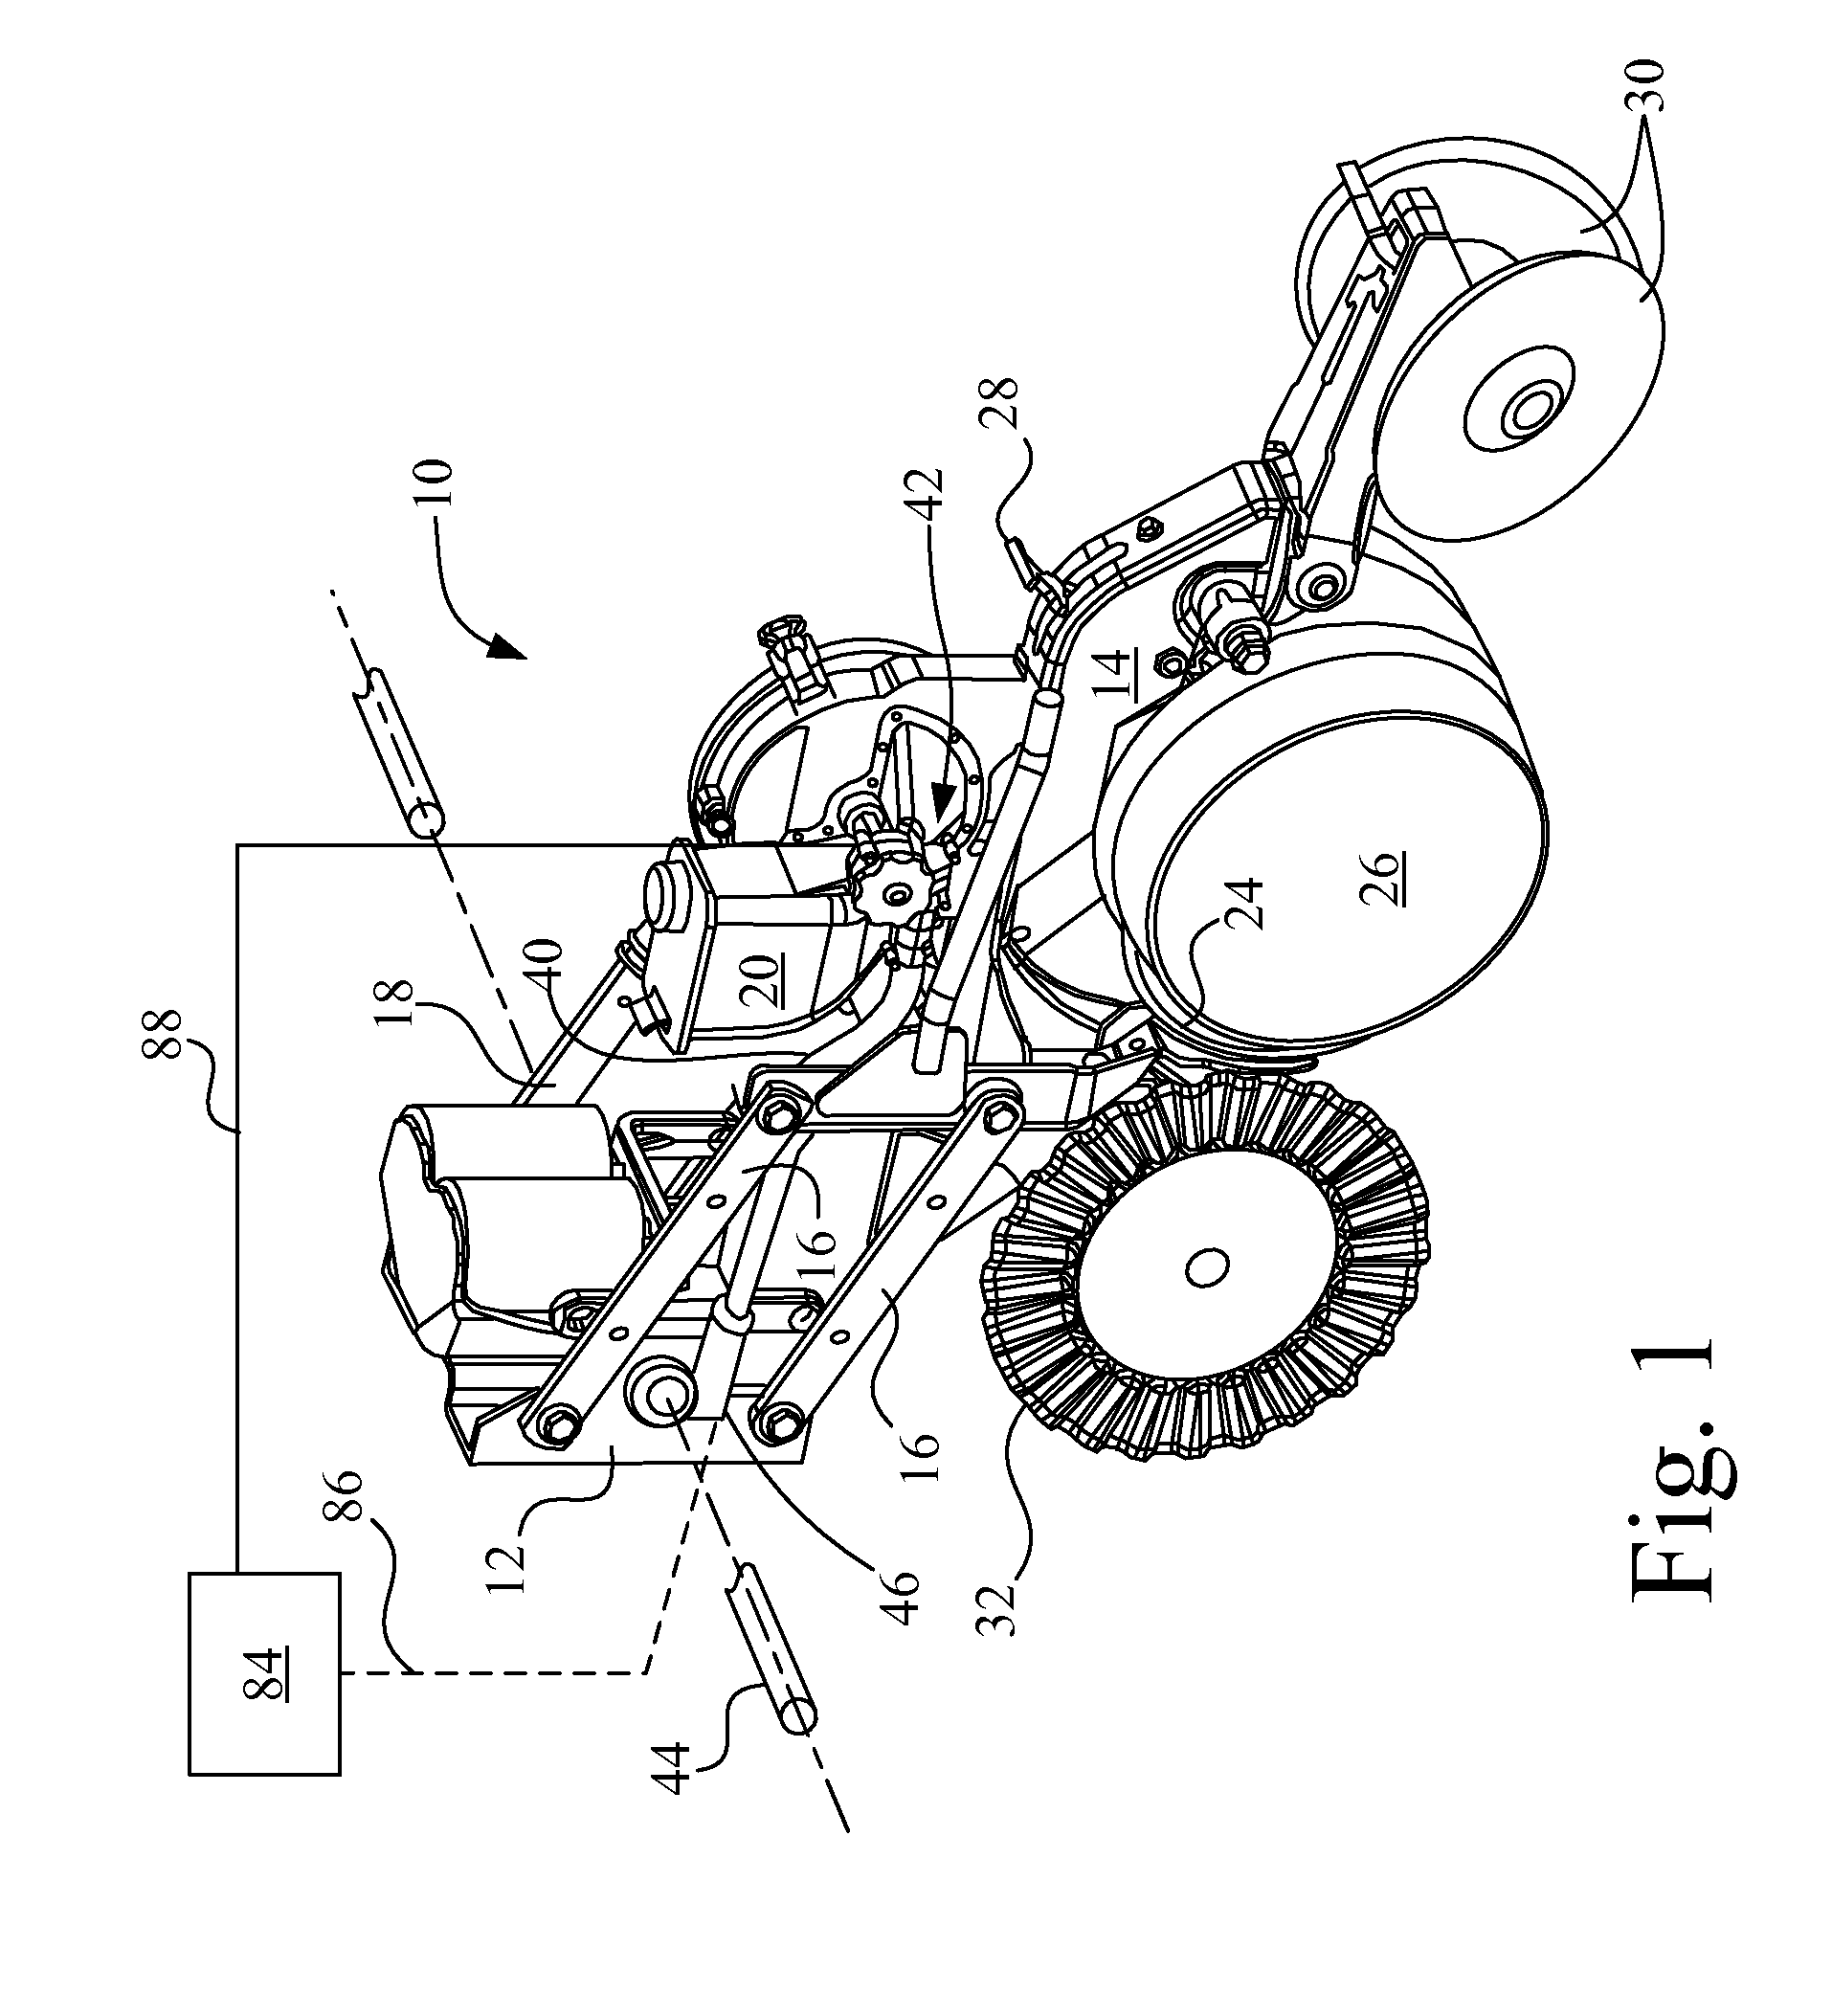 Integrated clutches for a seeding machine